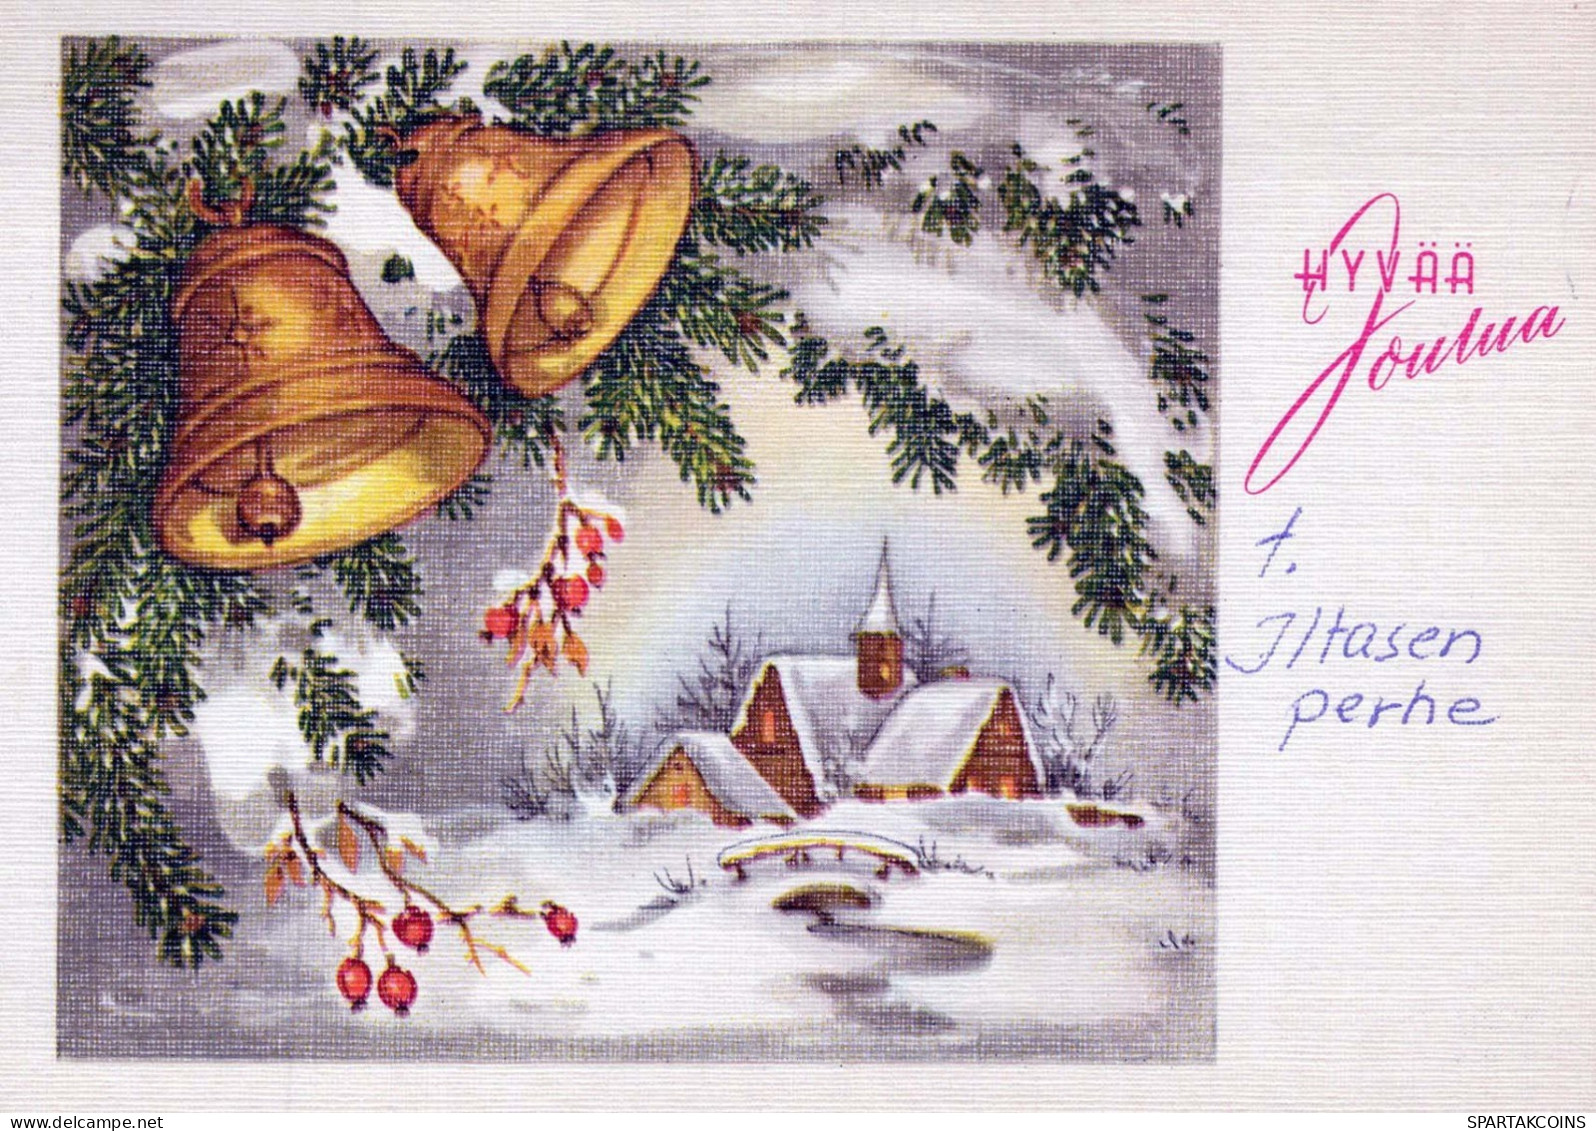 Buon Anno Natale CHIESA Vintage Cartolina CPSM #PAY323.IT - New Year